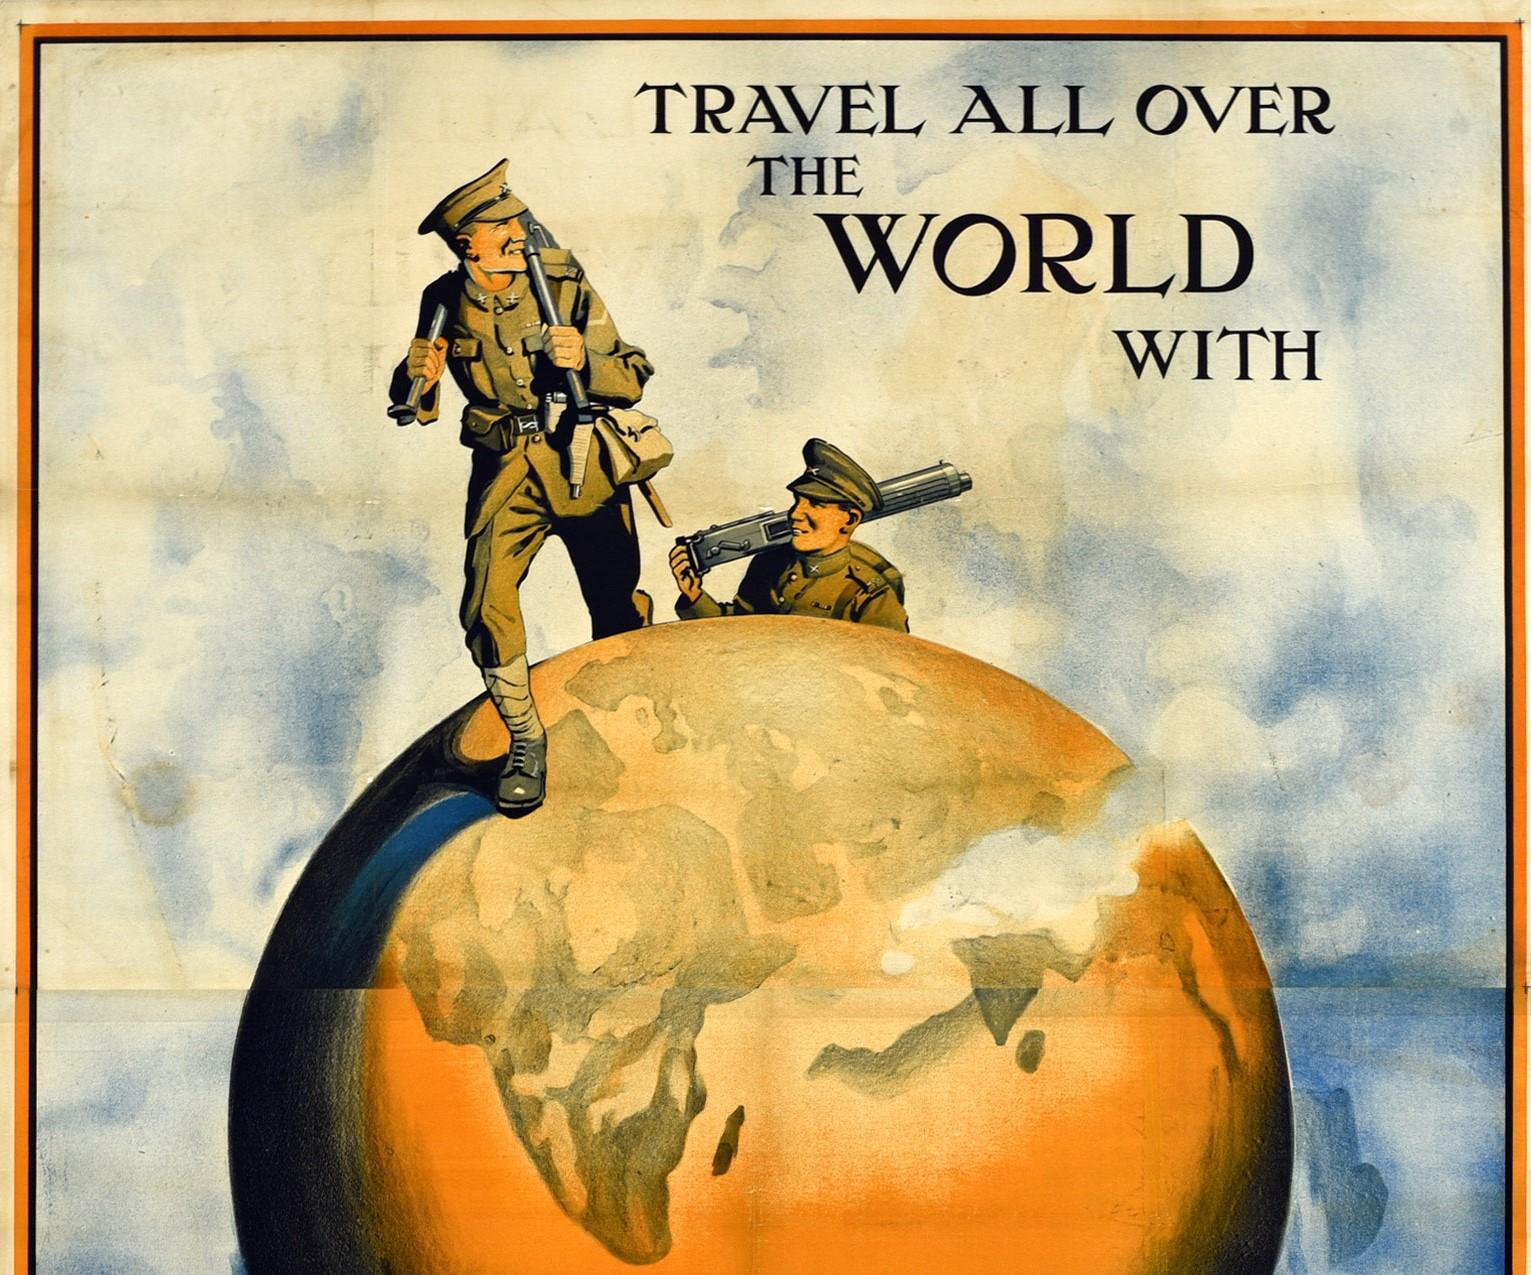 Original antique British army recruitment poster - Travel All Over The World With The Machine Gun Corps - featuring a great illustration of two smiling soldiers in uniform carrying machine gun parts over their shoulders as they walk over a globe of